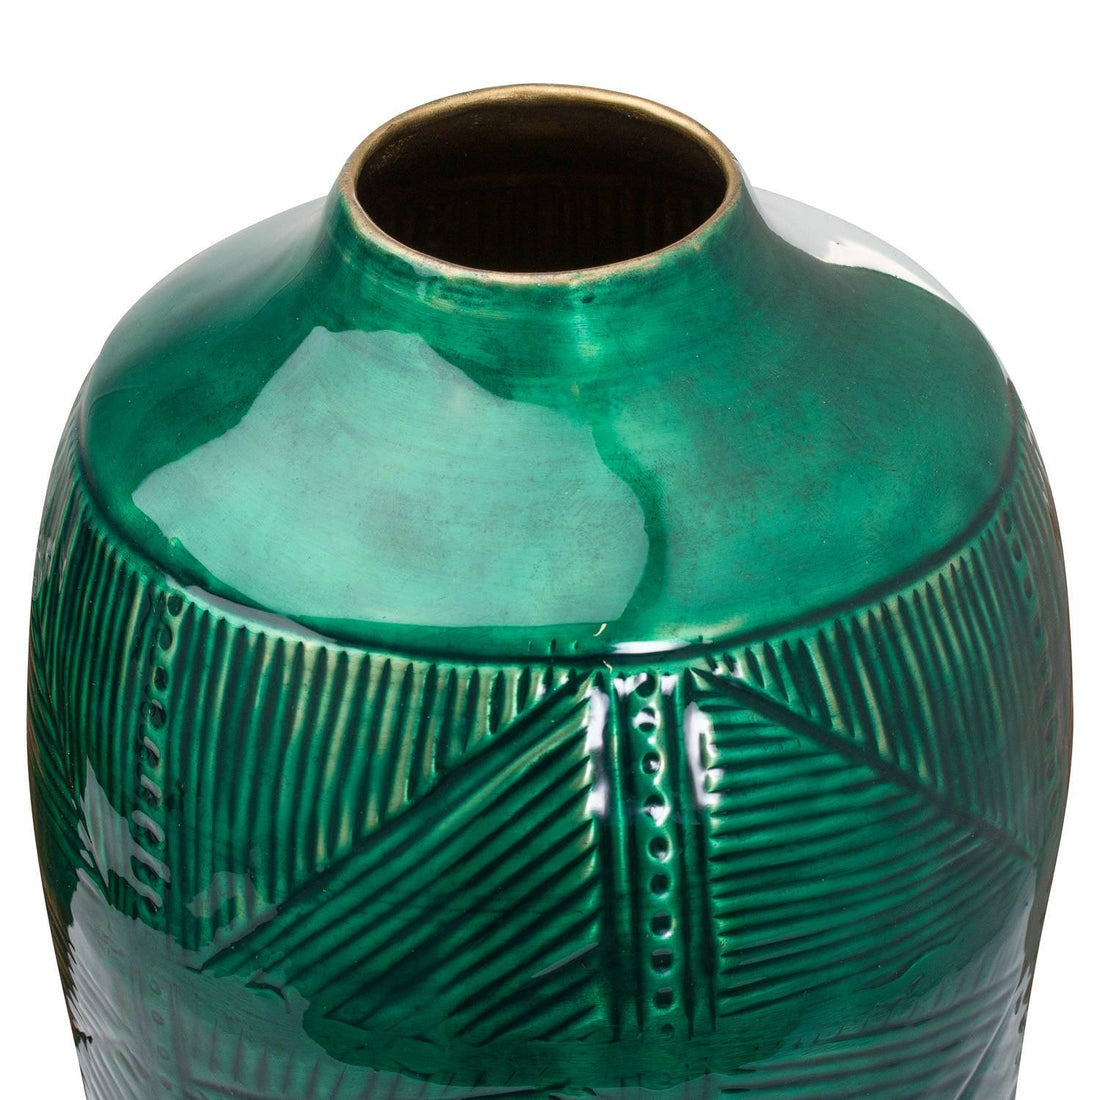 Aztec Collection Brass embossed Ceramic Dipped Urn Vase - £84.95 - Gifts & Accessories > Vases 